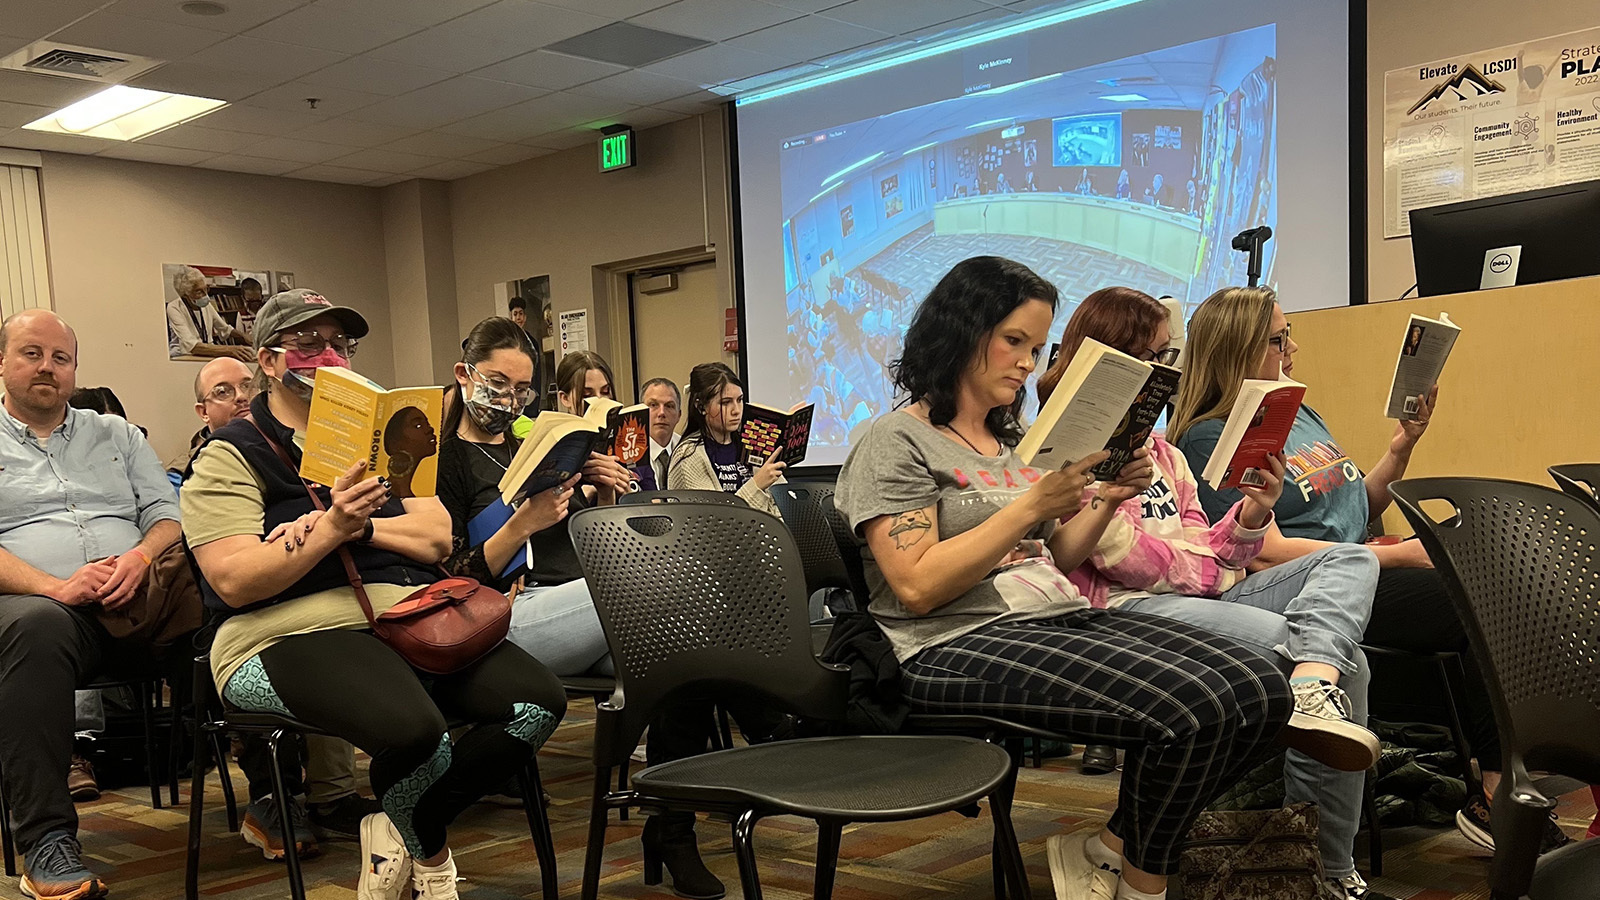 Parents and students read banned books silently during a school board meeting.